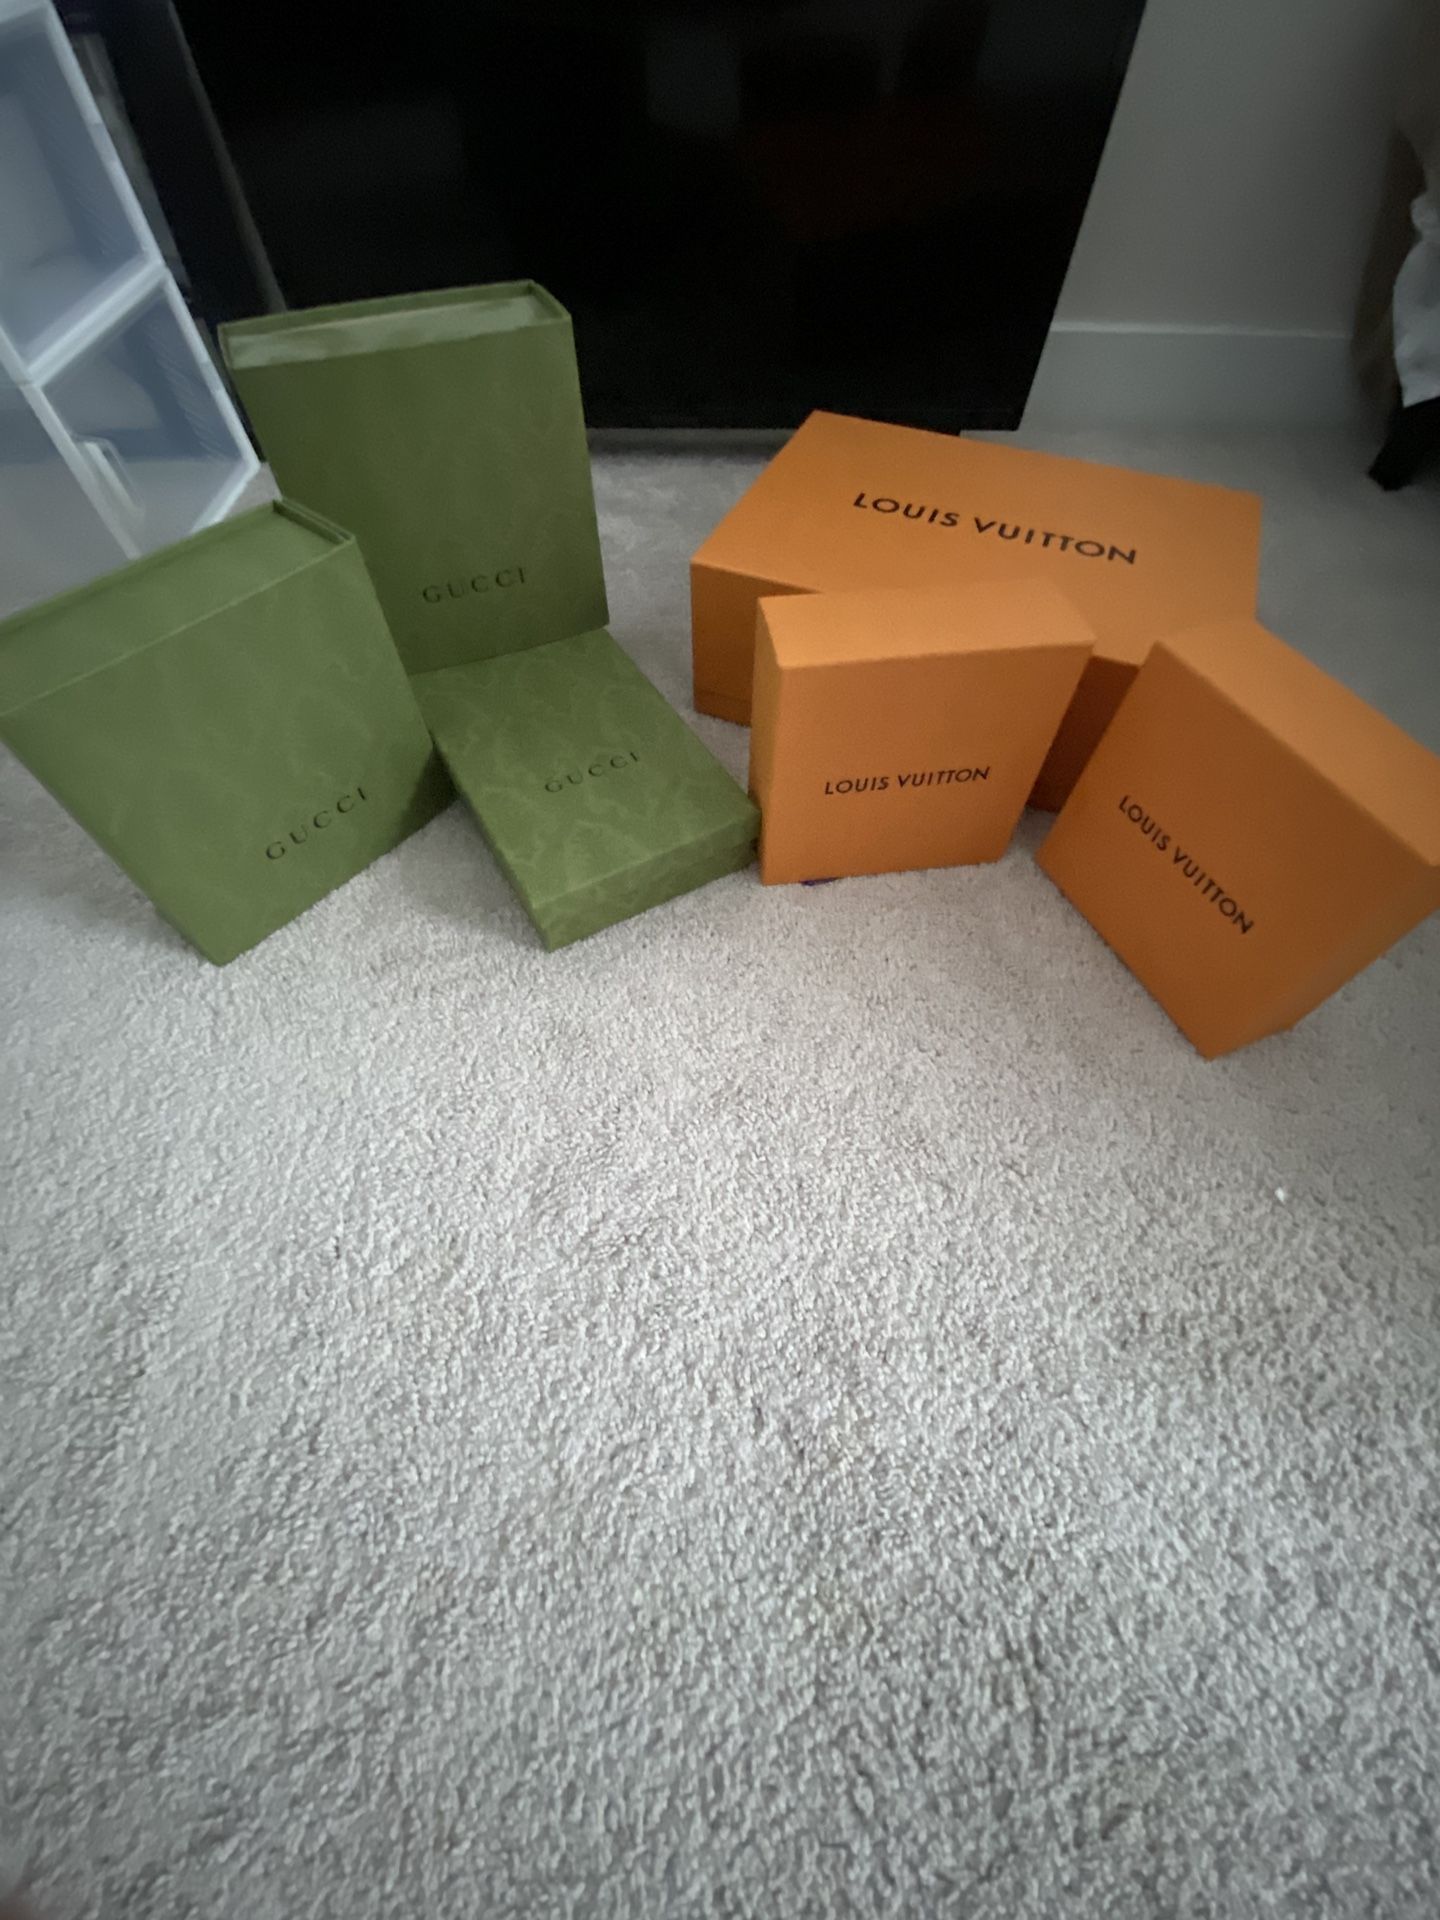 REAL Gucci And Louis Vuitton Boxes